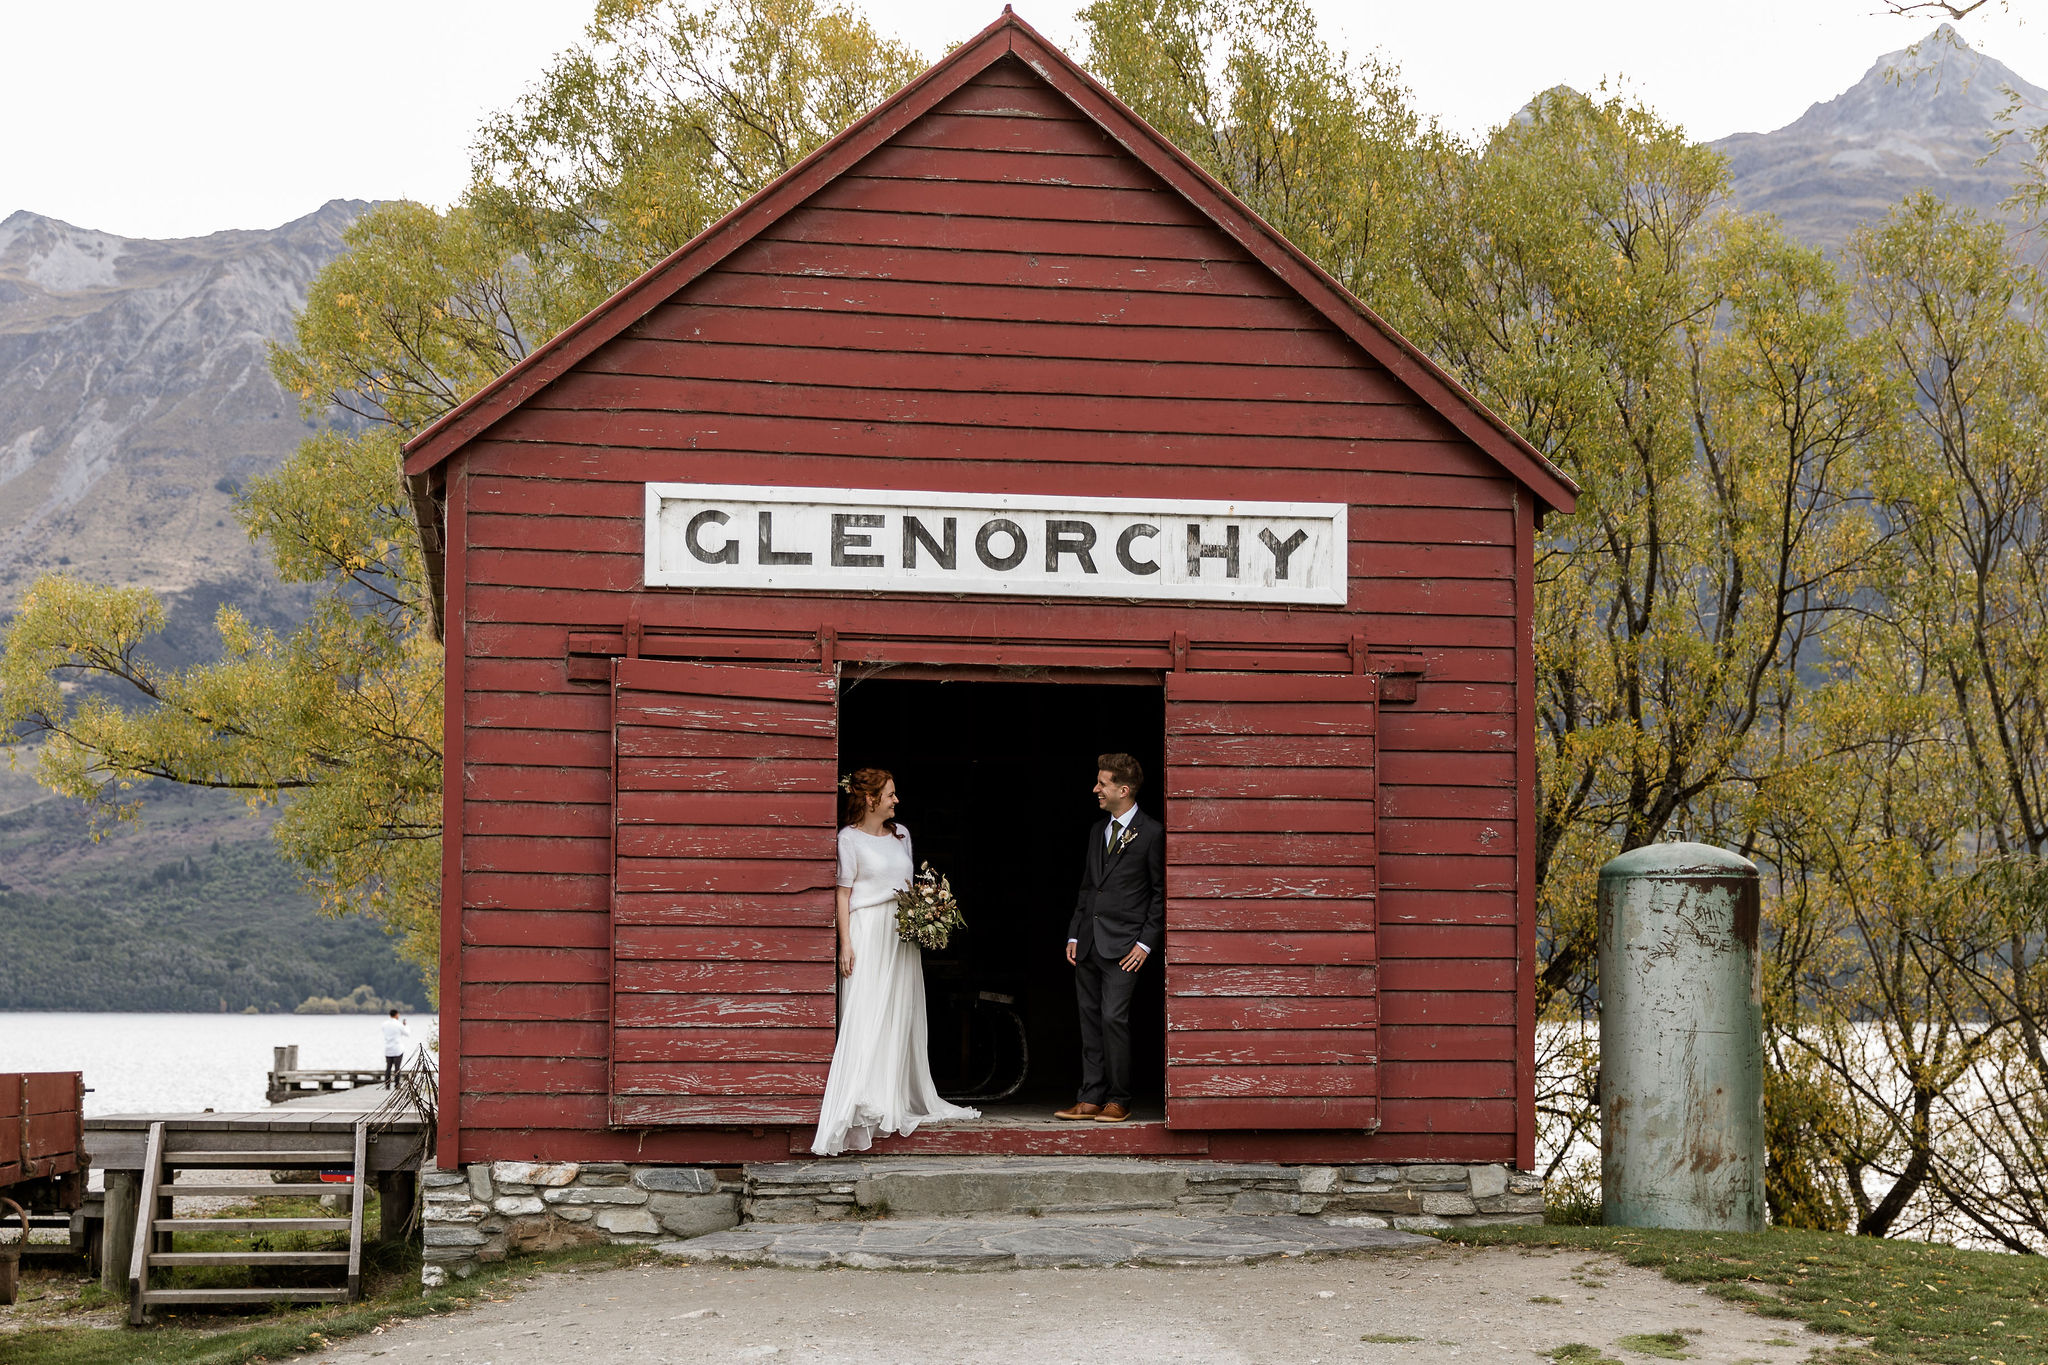 Glenorchy Red Shed - Susan Miller Photography